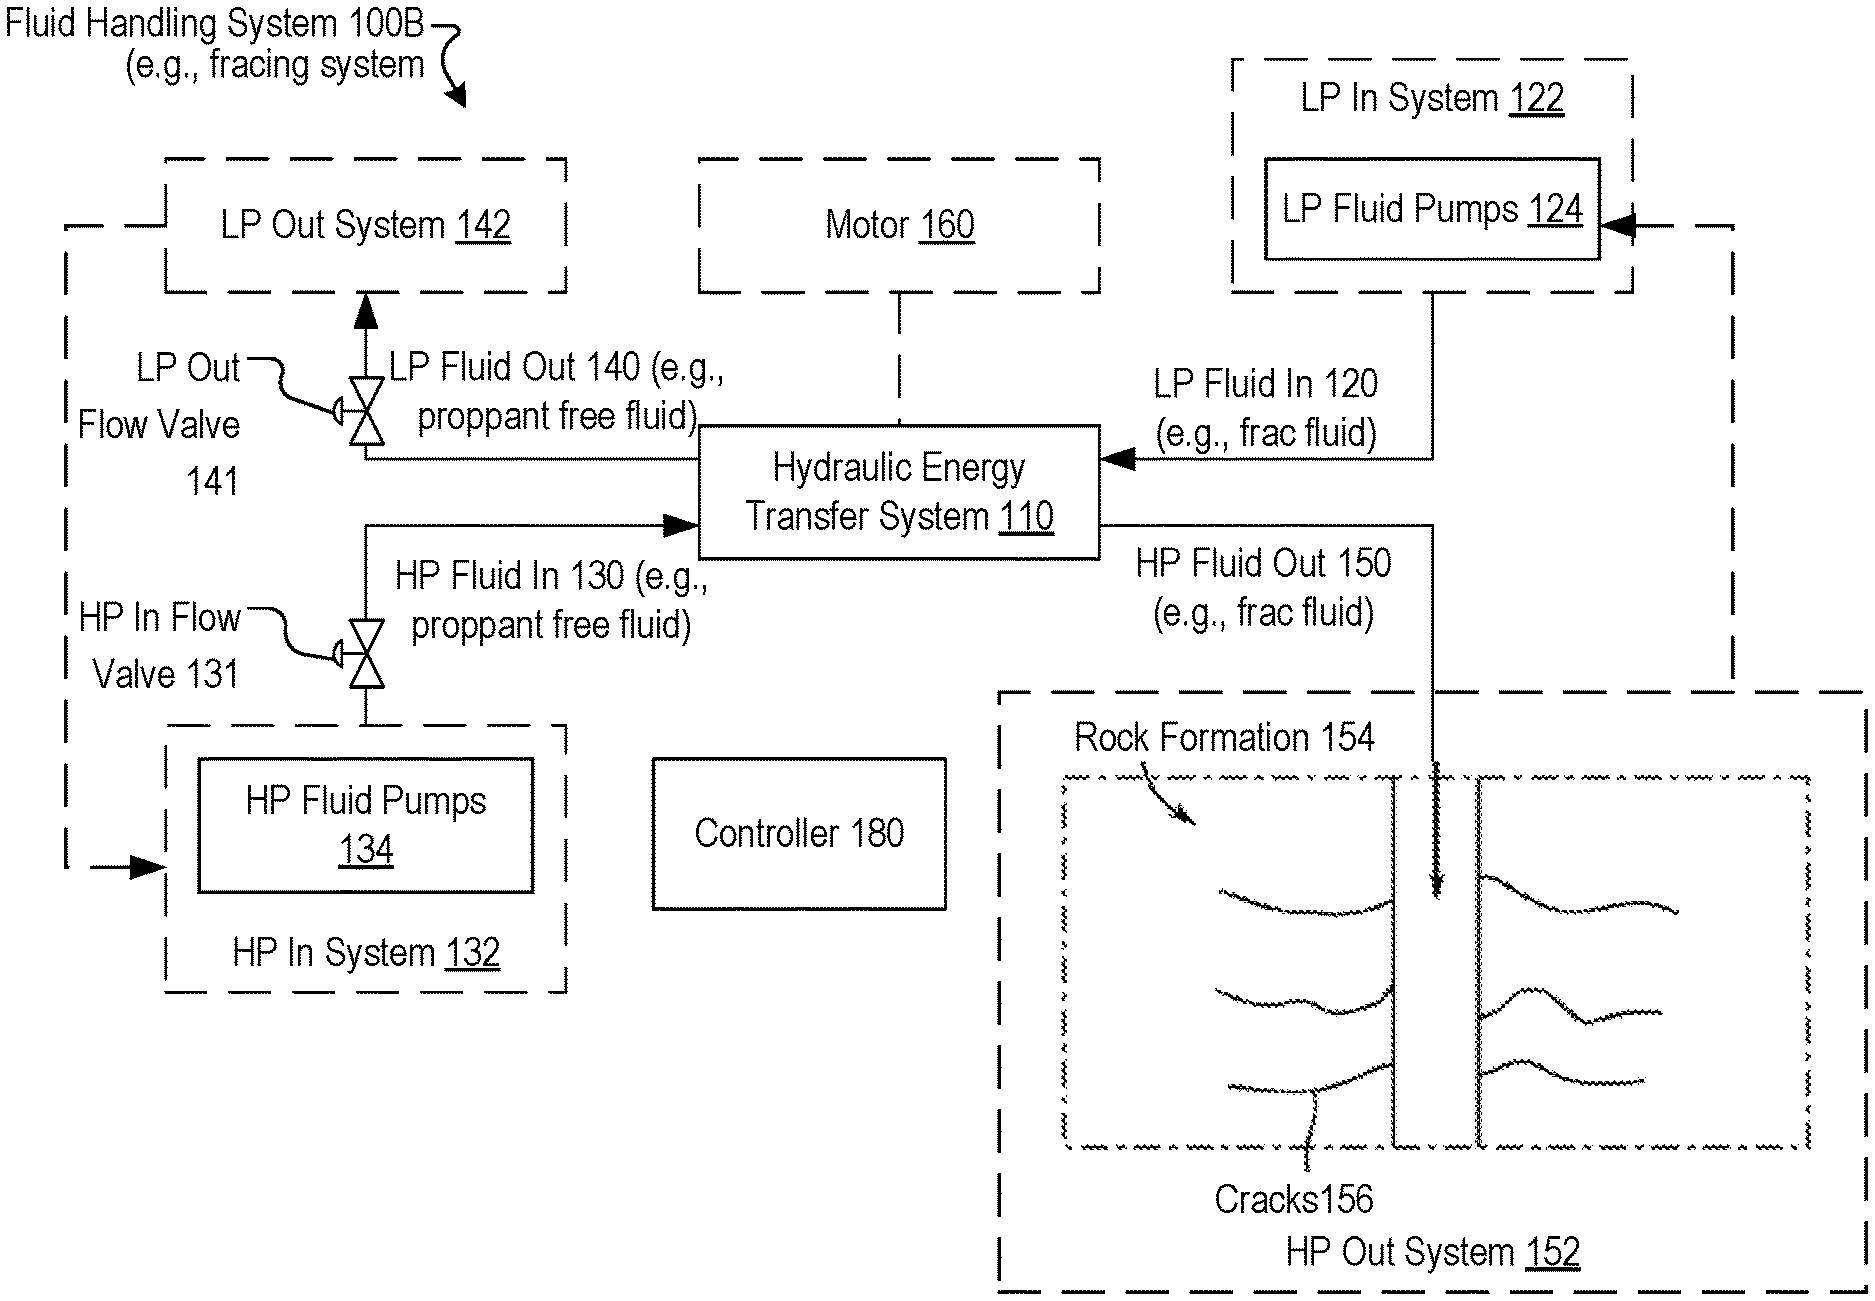 Energy Recovery Inc Patent: Pressure Exchanger System with Flowrate Control - Power Technology